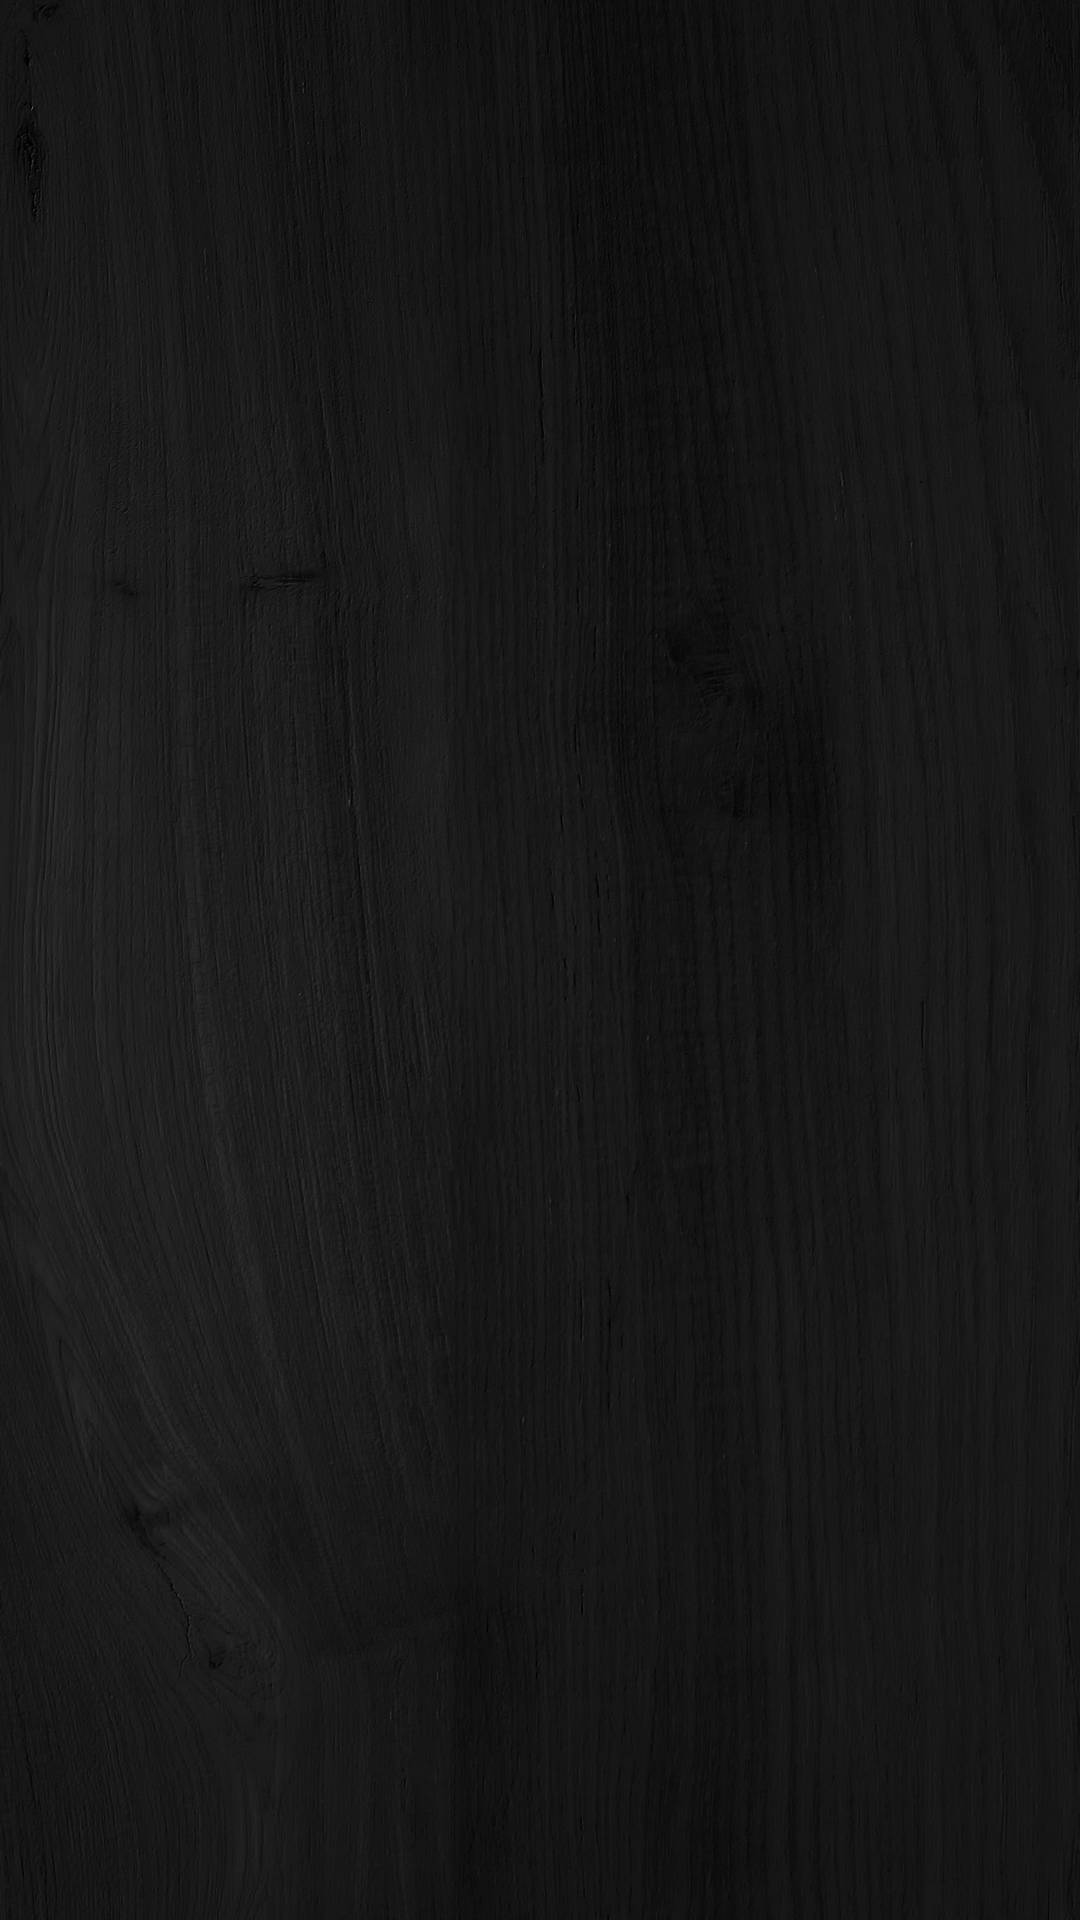 Caption: Enigmatic Wooden Panel Wall in Darkness Wallpaper